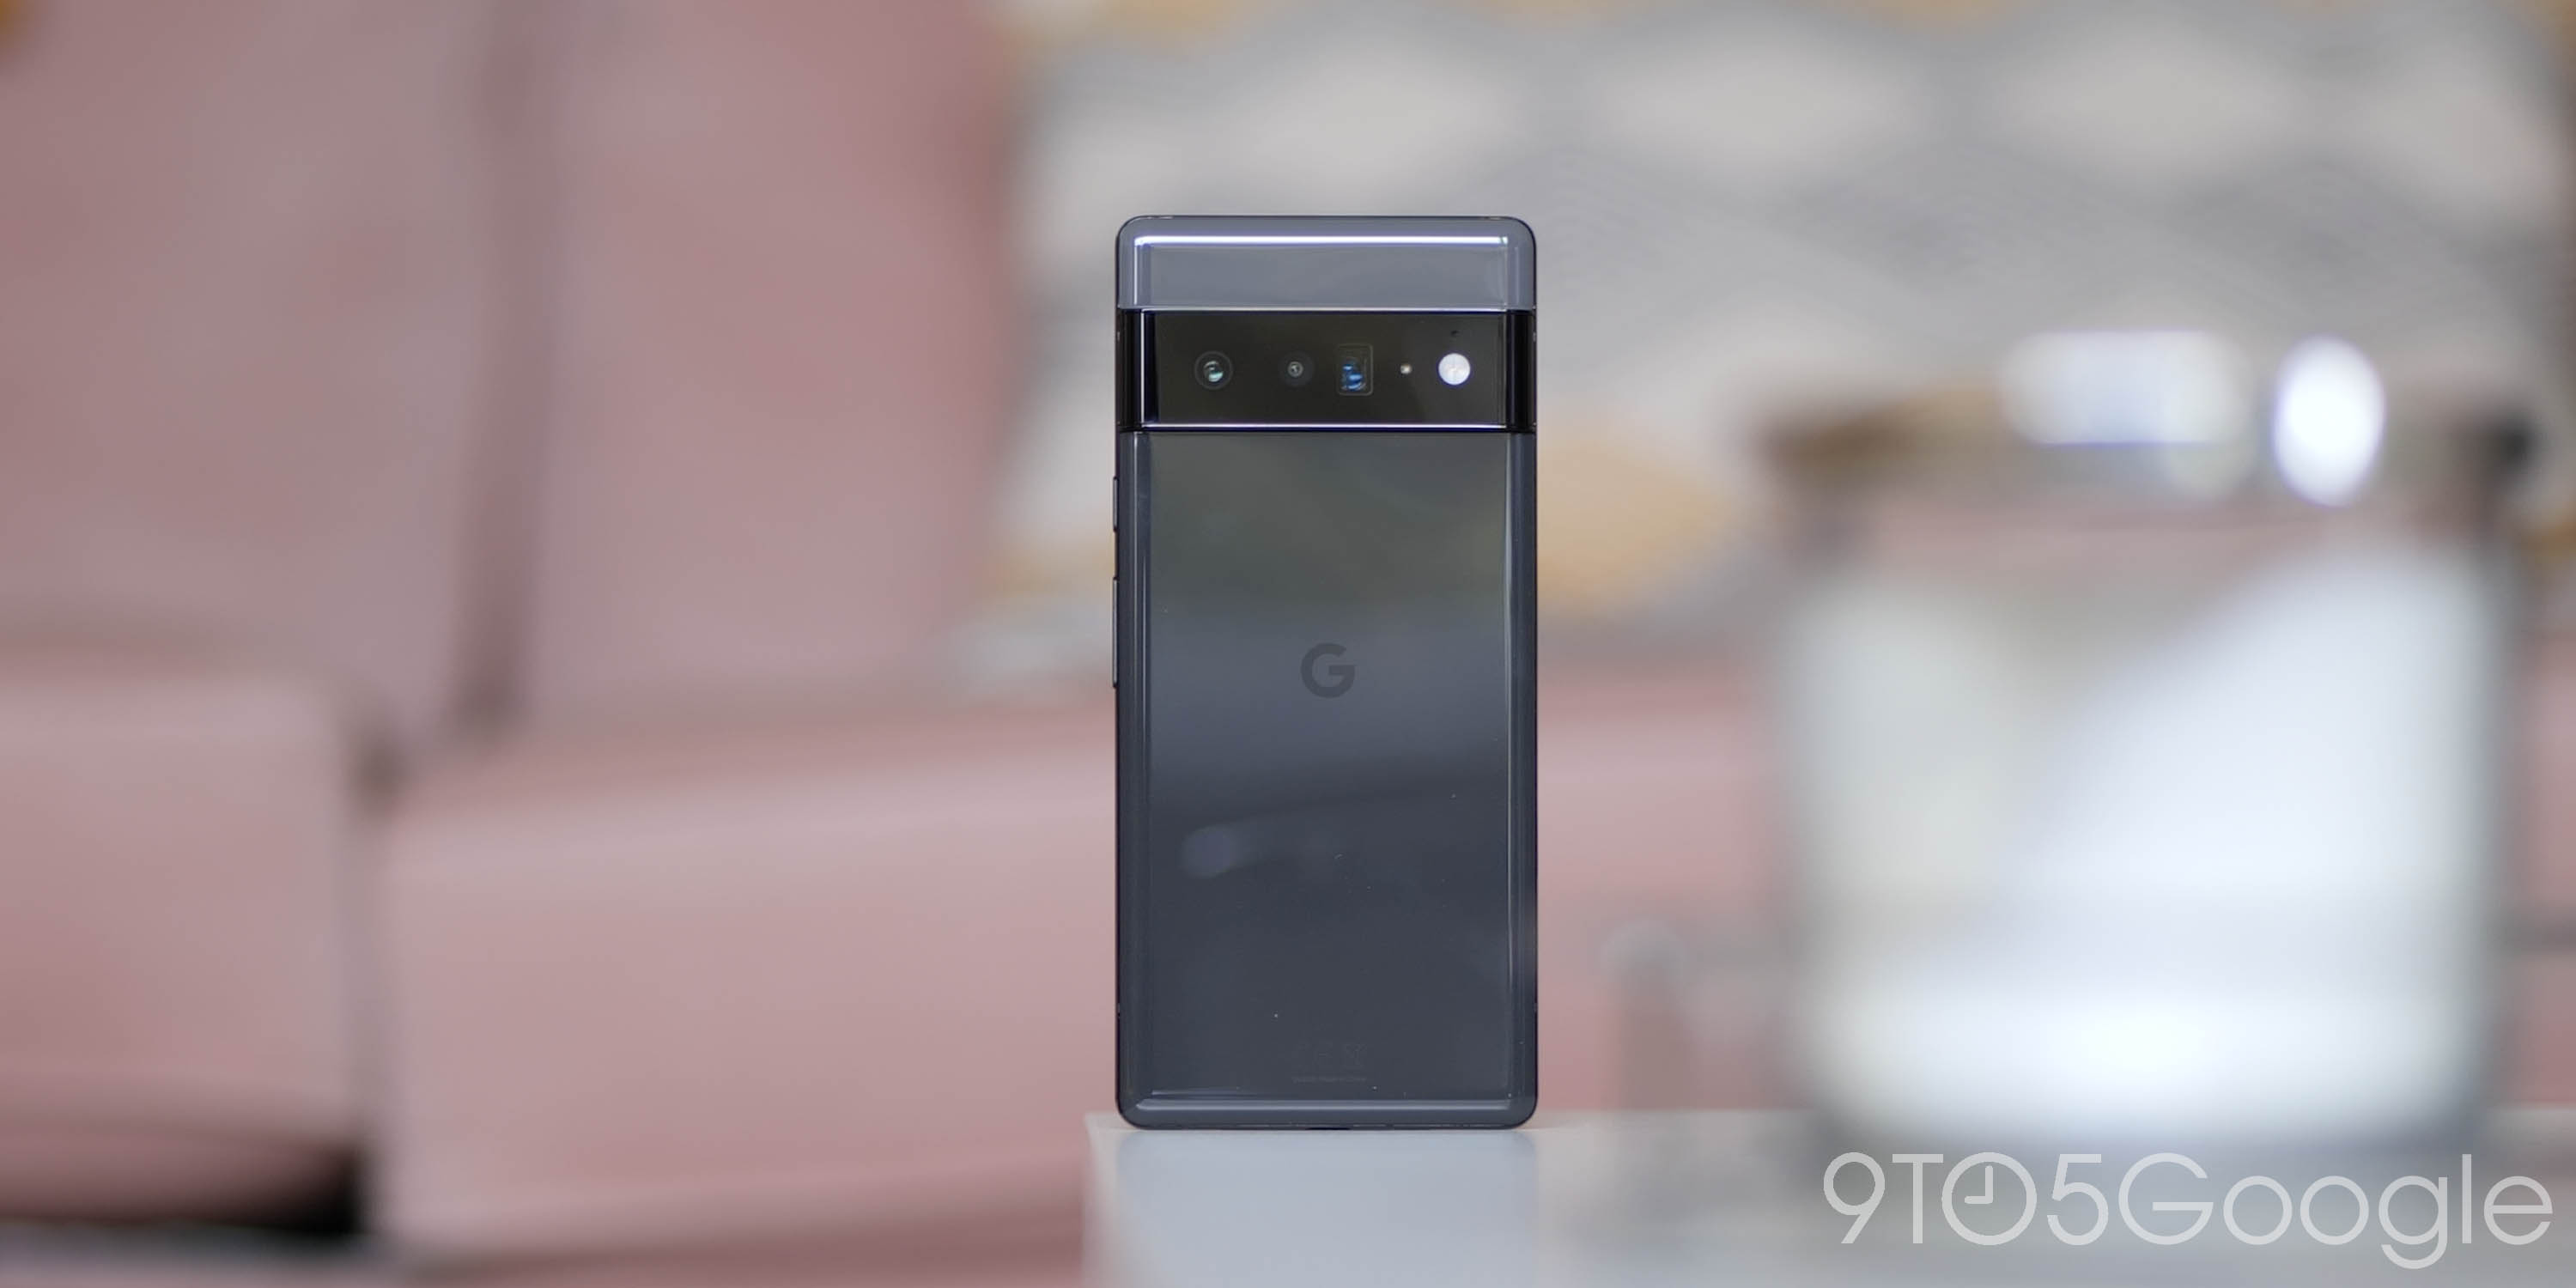 The Pixel 6 Pro is highly likely to be succeeded by the Pixel 7 Pro which we expect Google to launch in 2022.